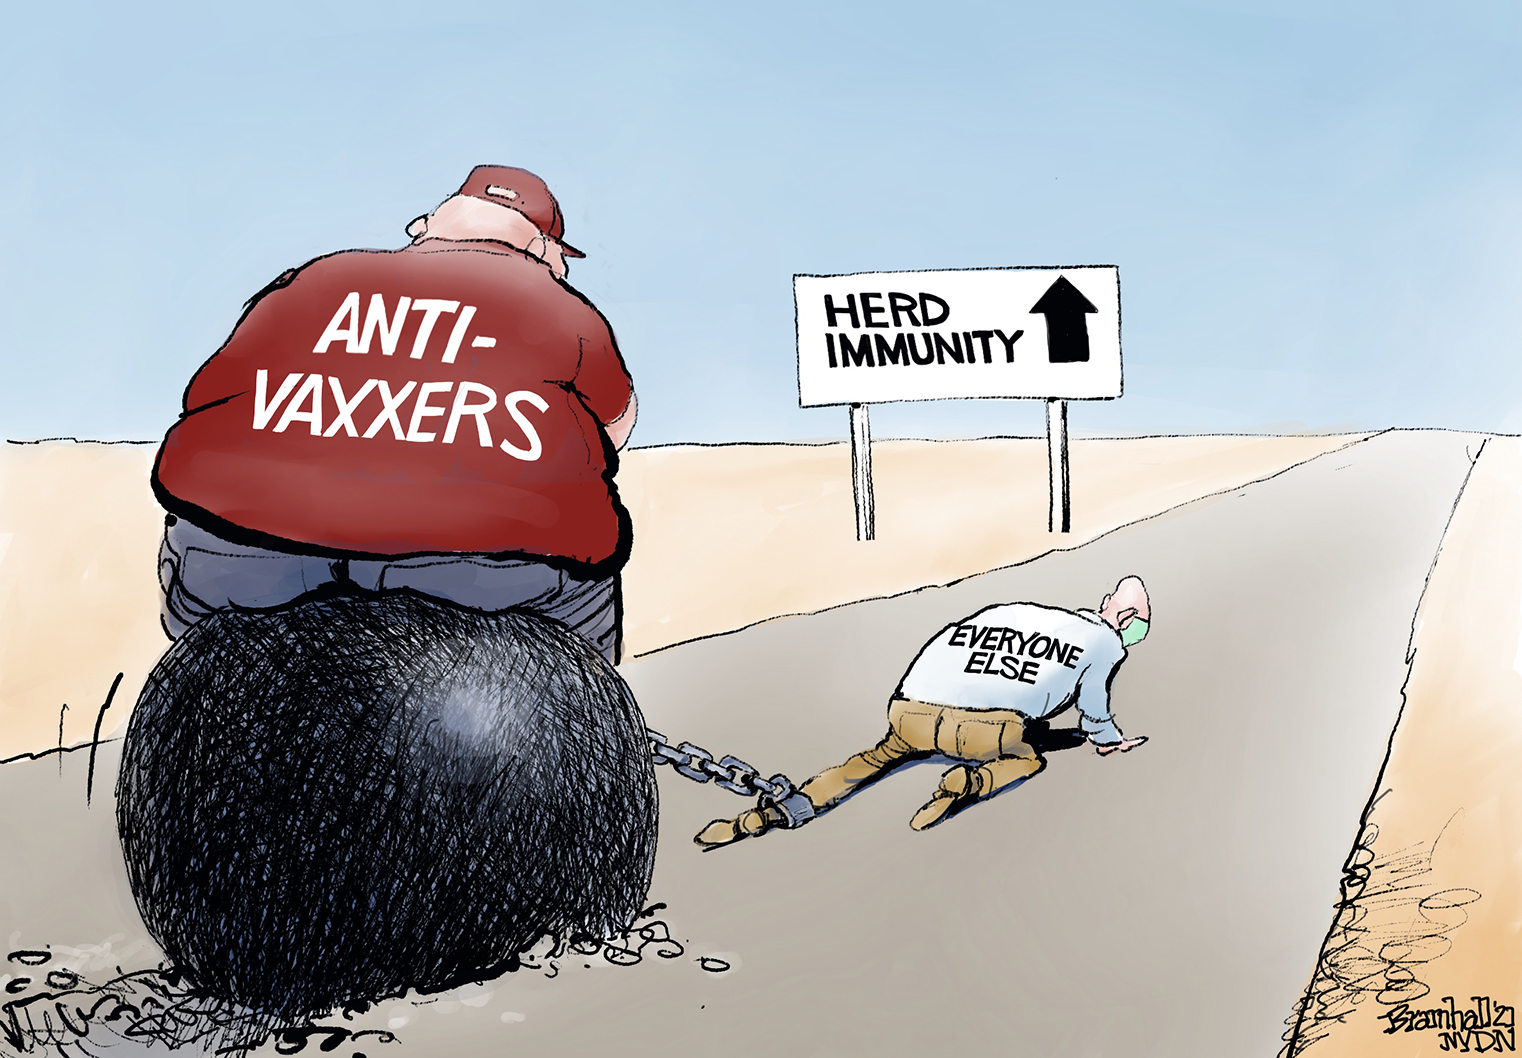 5 scathingly funny cartoons about anti-vaxxers jeopardizing herd immunity |  The Week